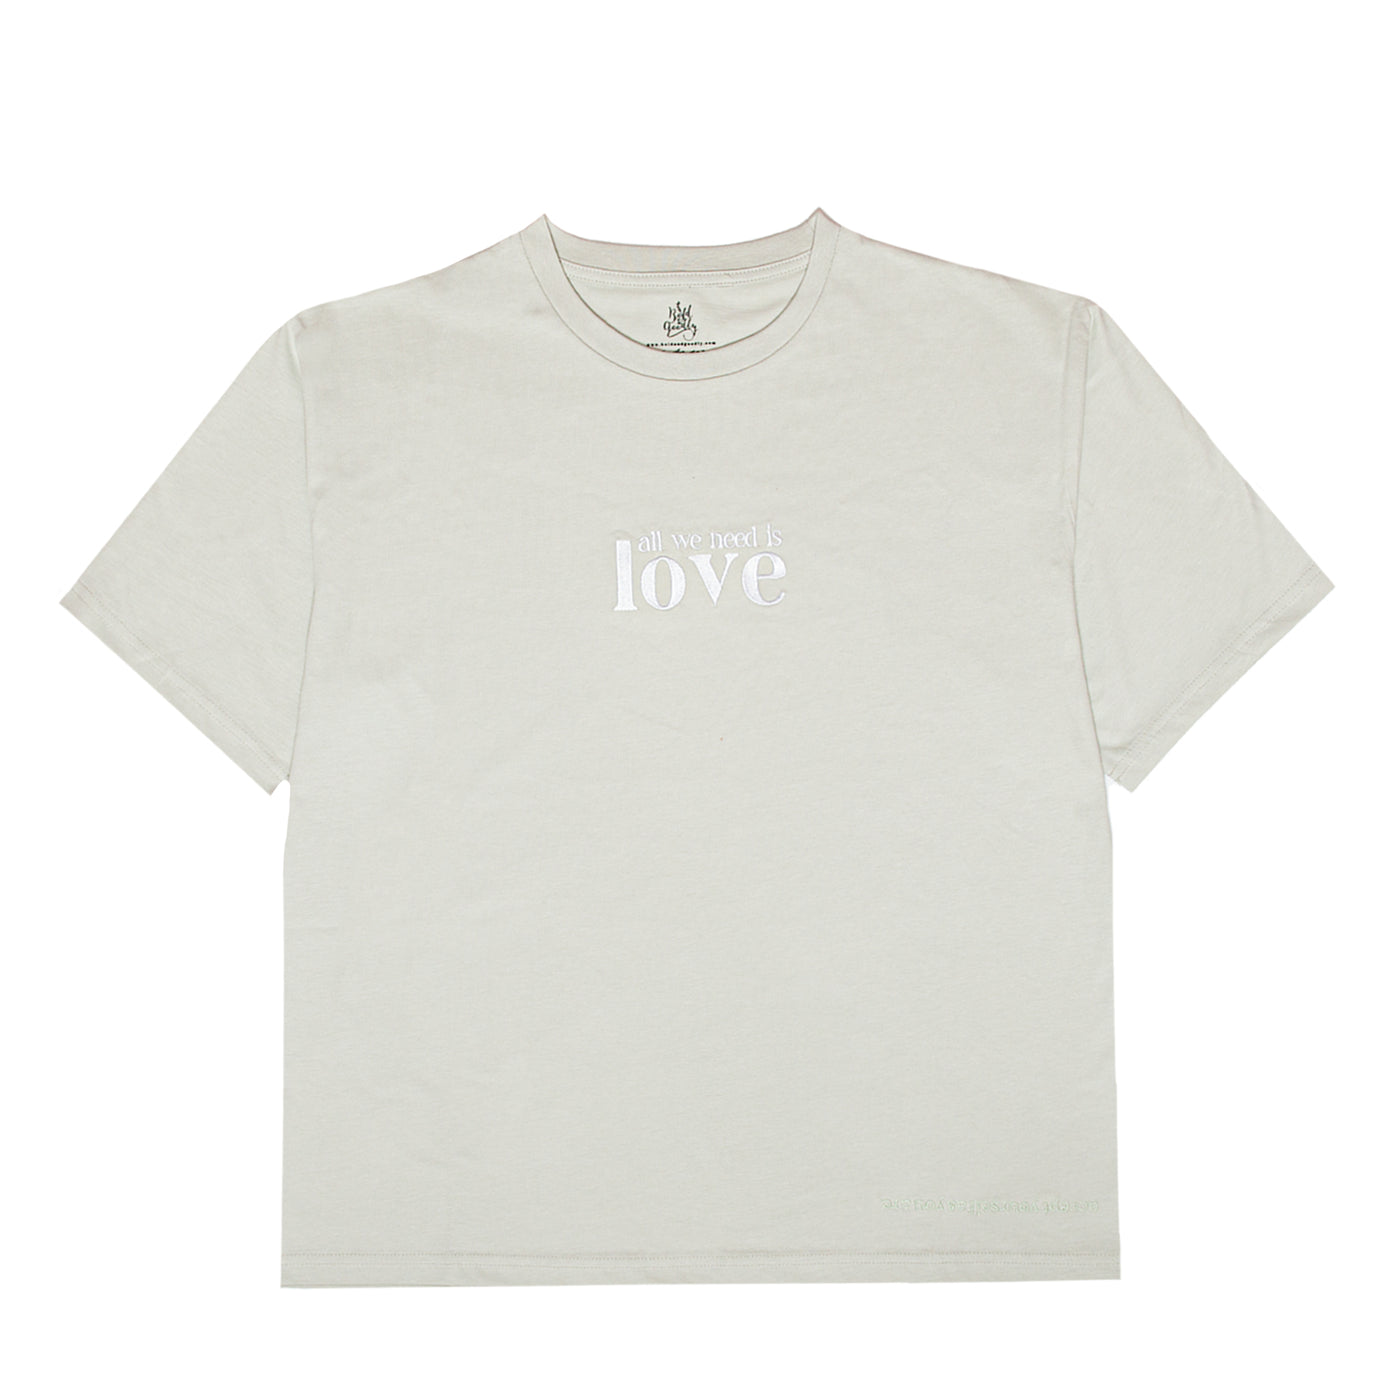 ALL WE NEED IS LOVE(ACCEPT YOURSELF AS YOU ARE) T-SHIRT - Bold&Goodly